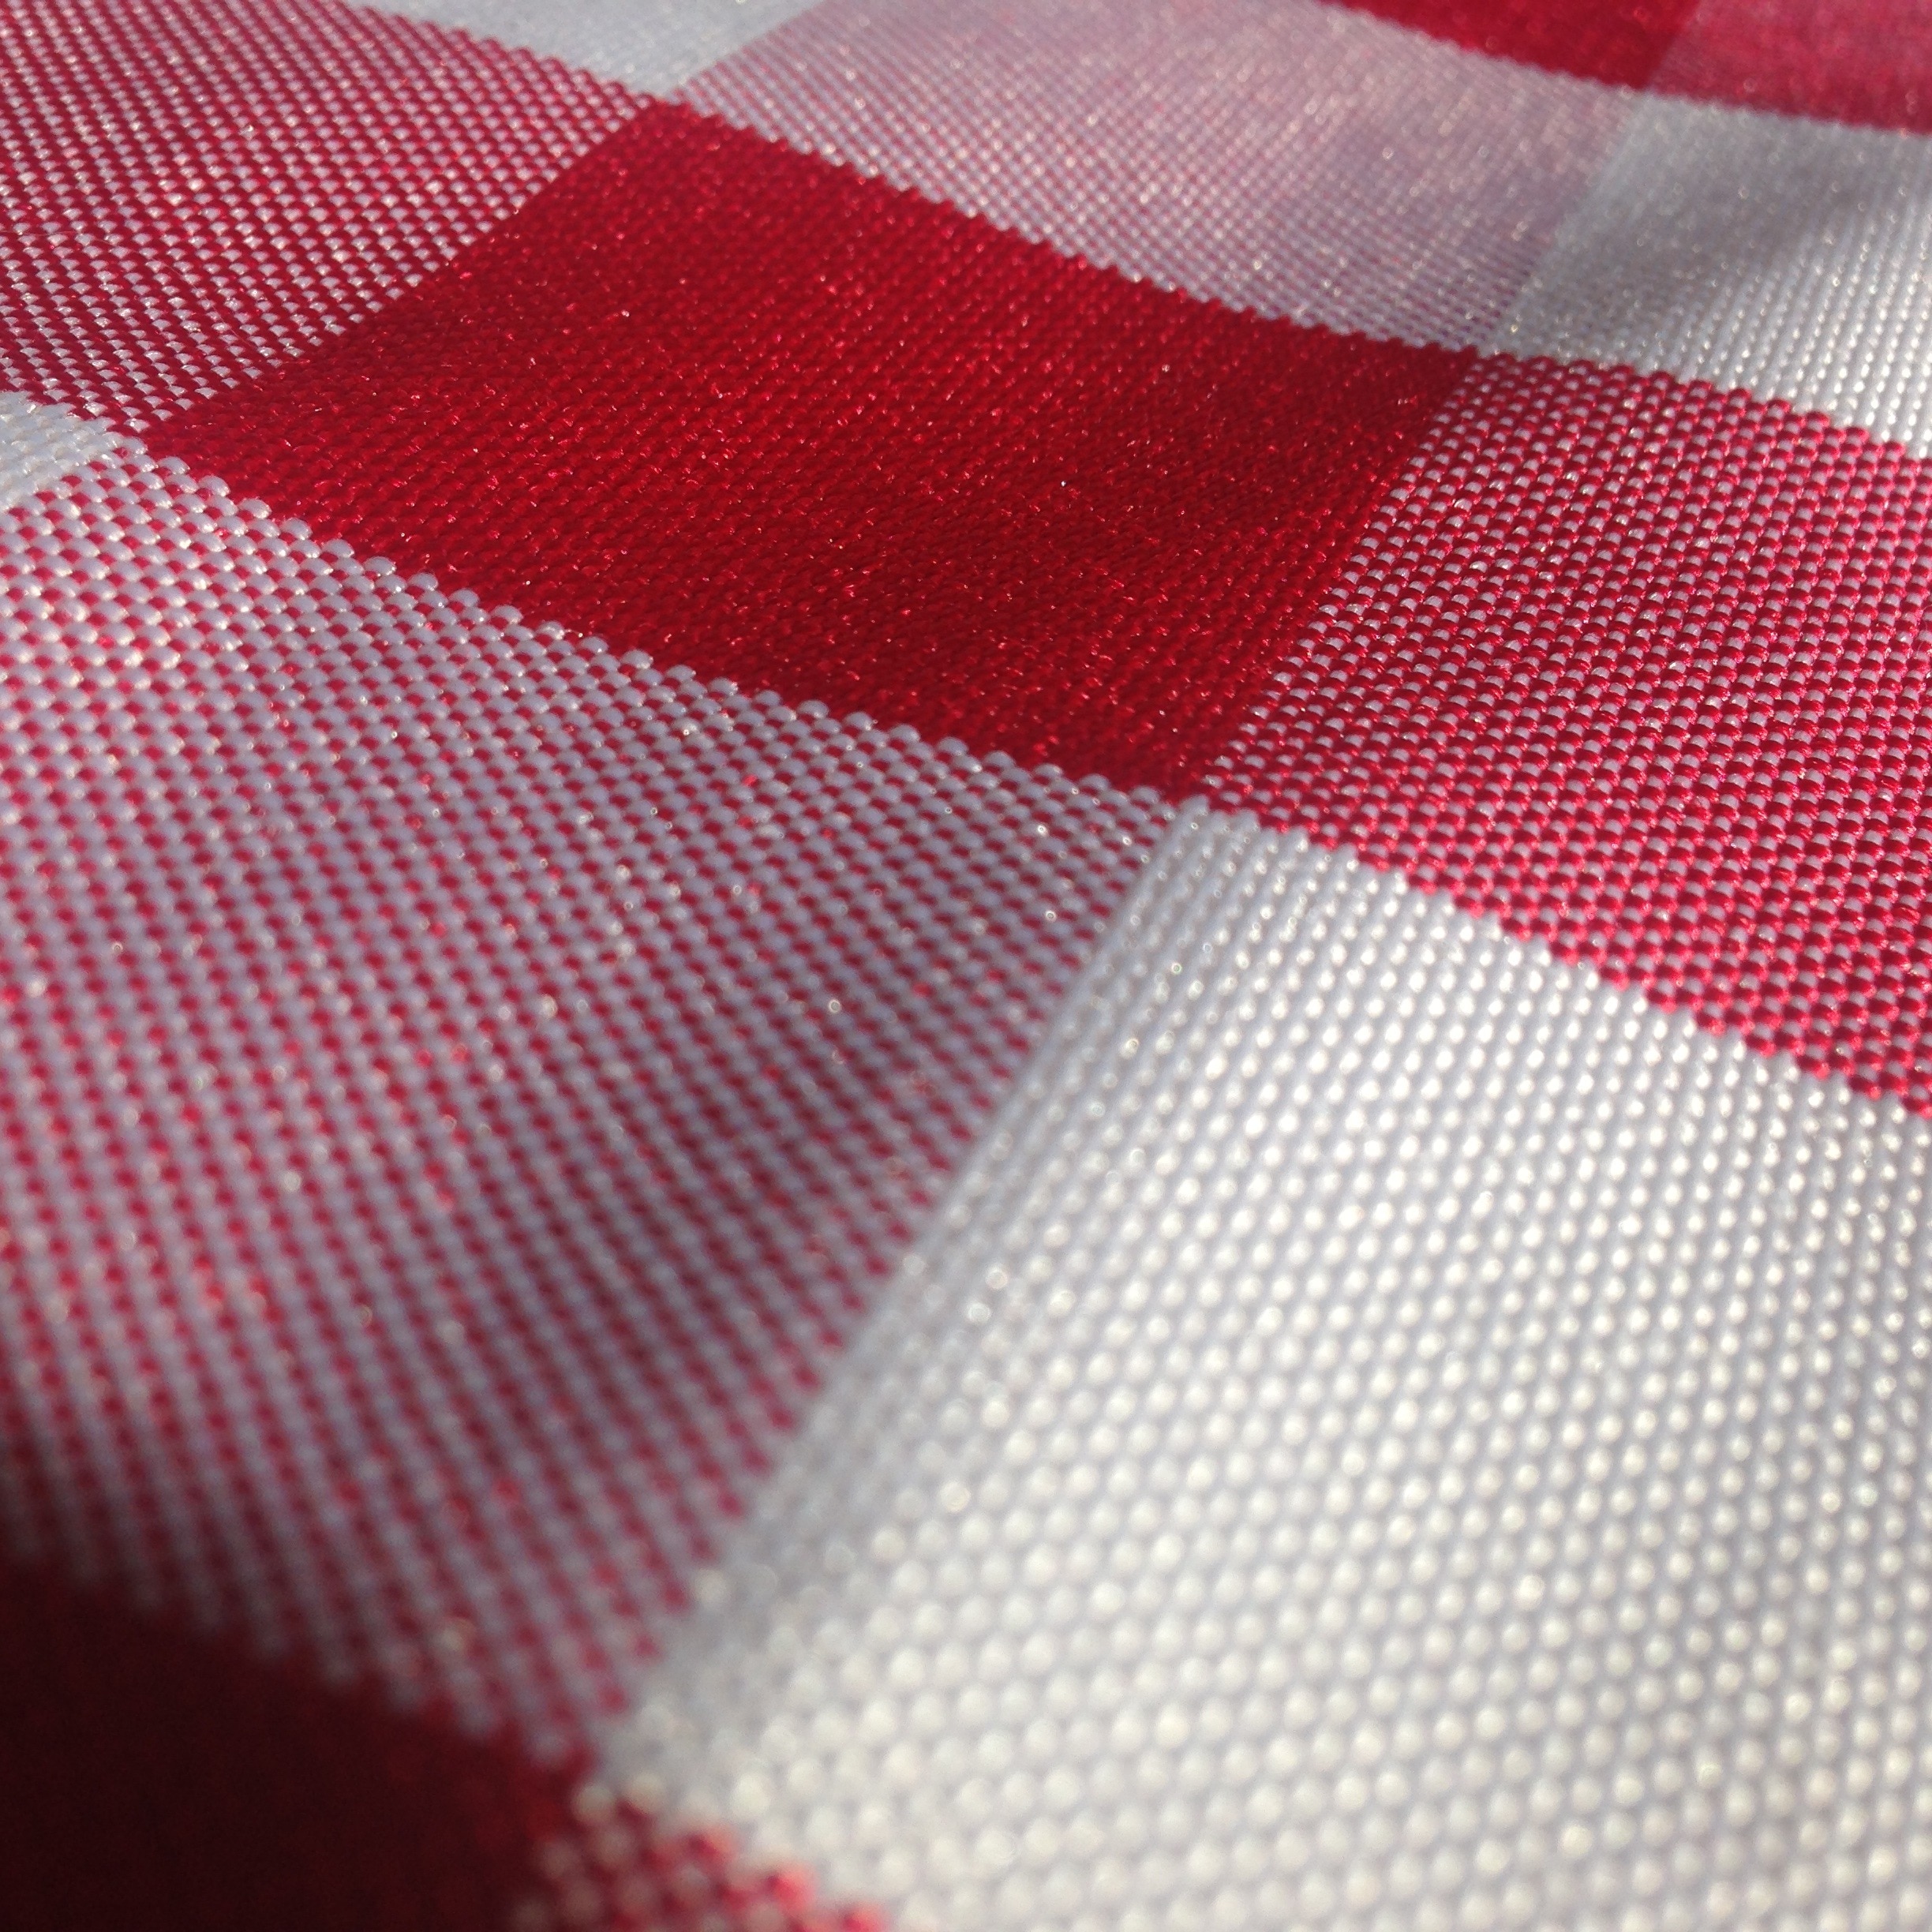 red and white gingham print textile